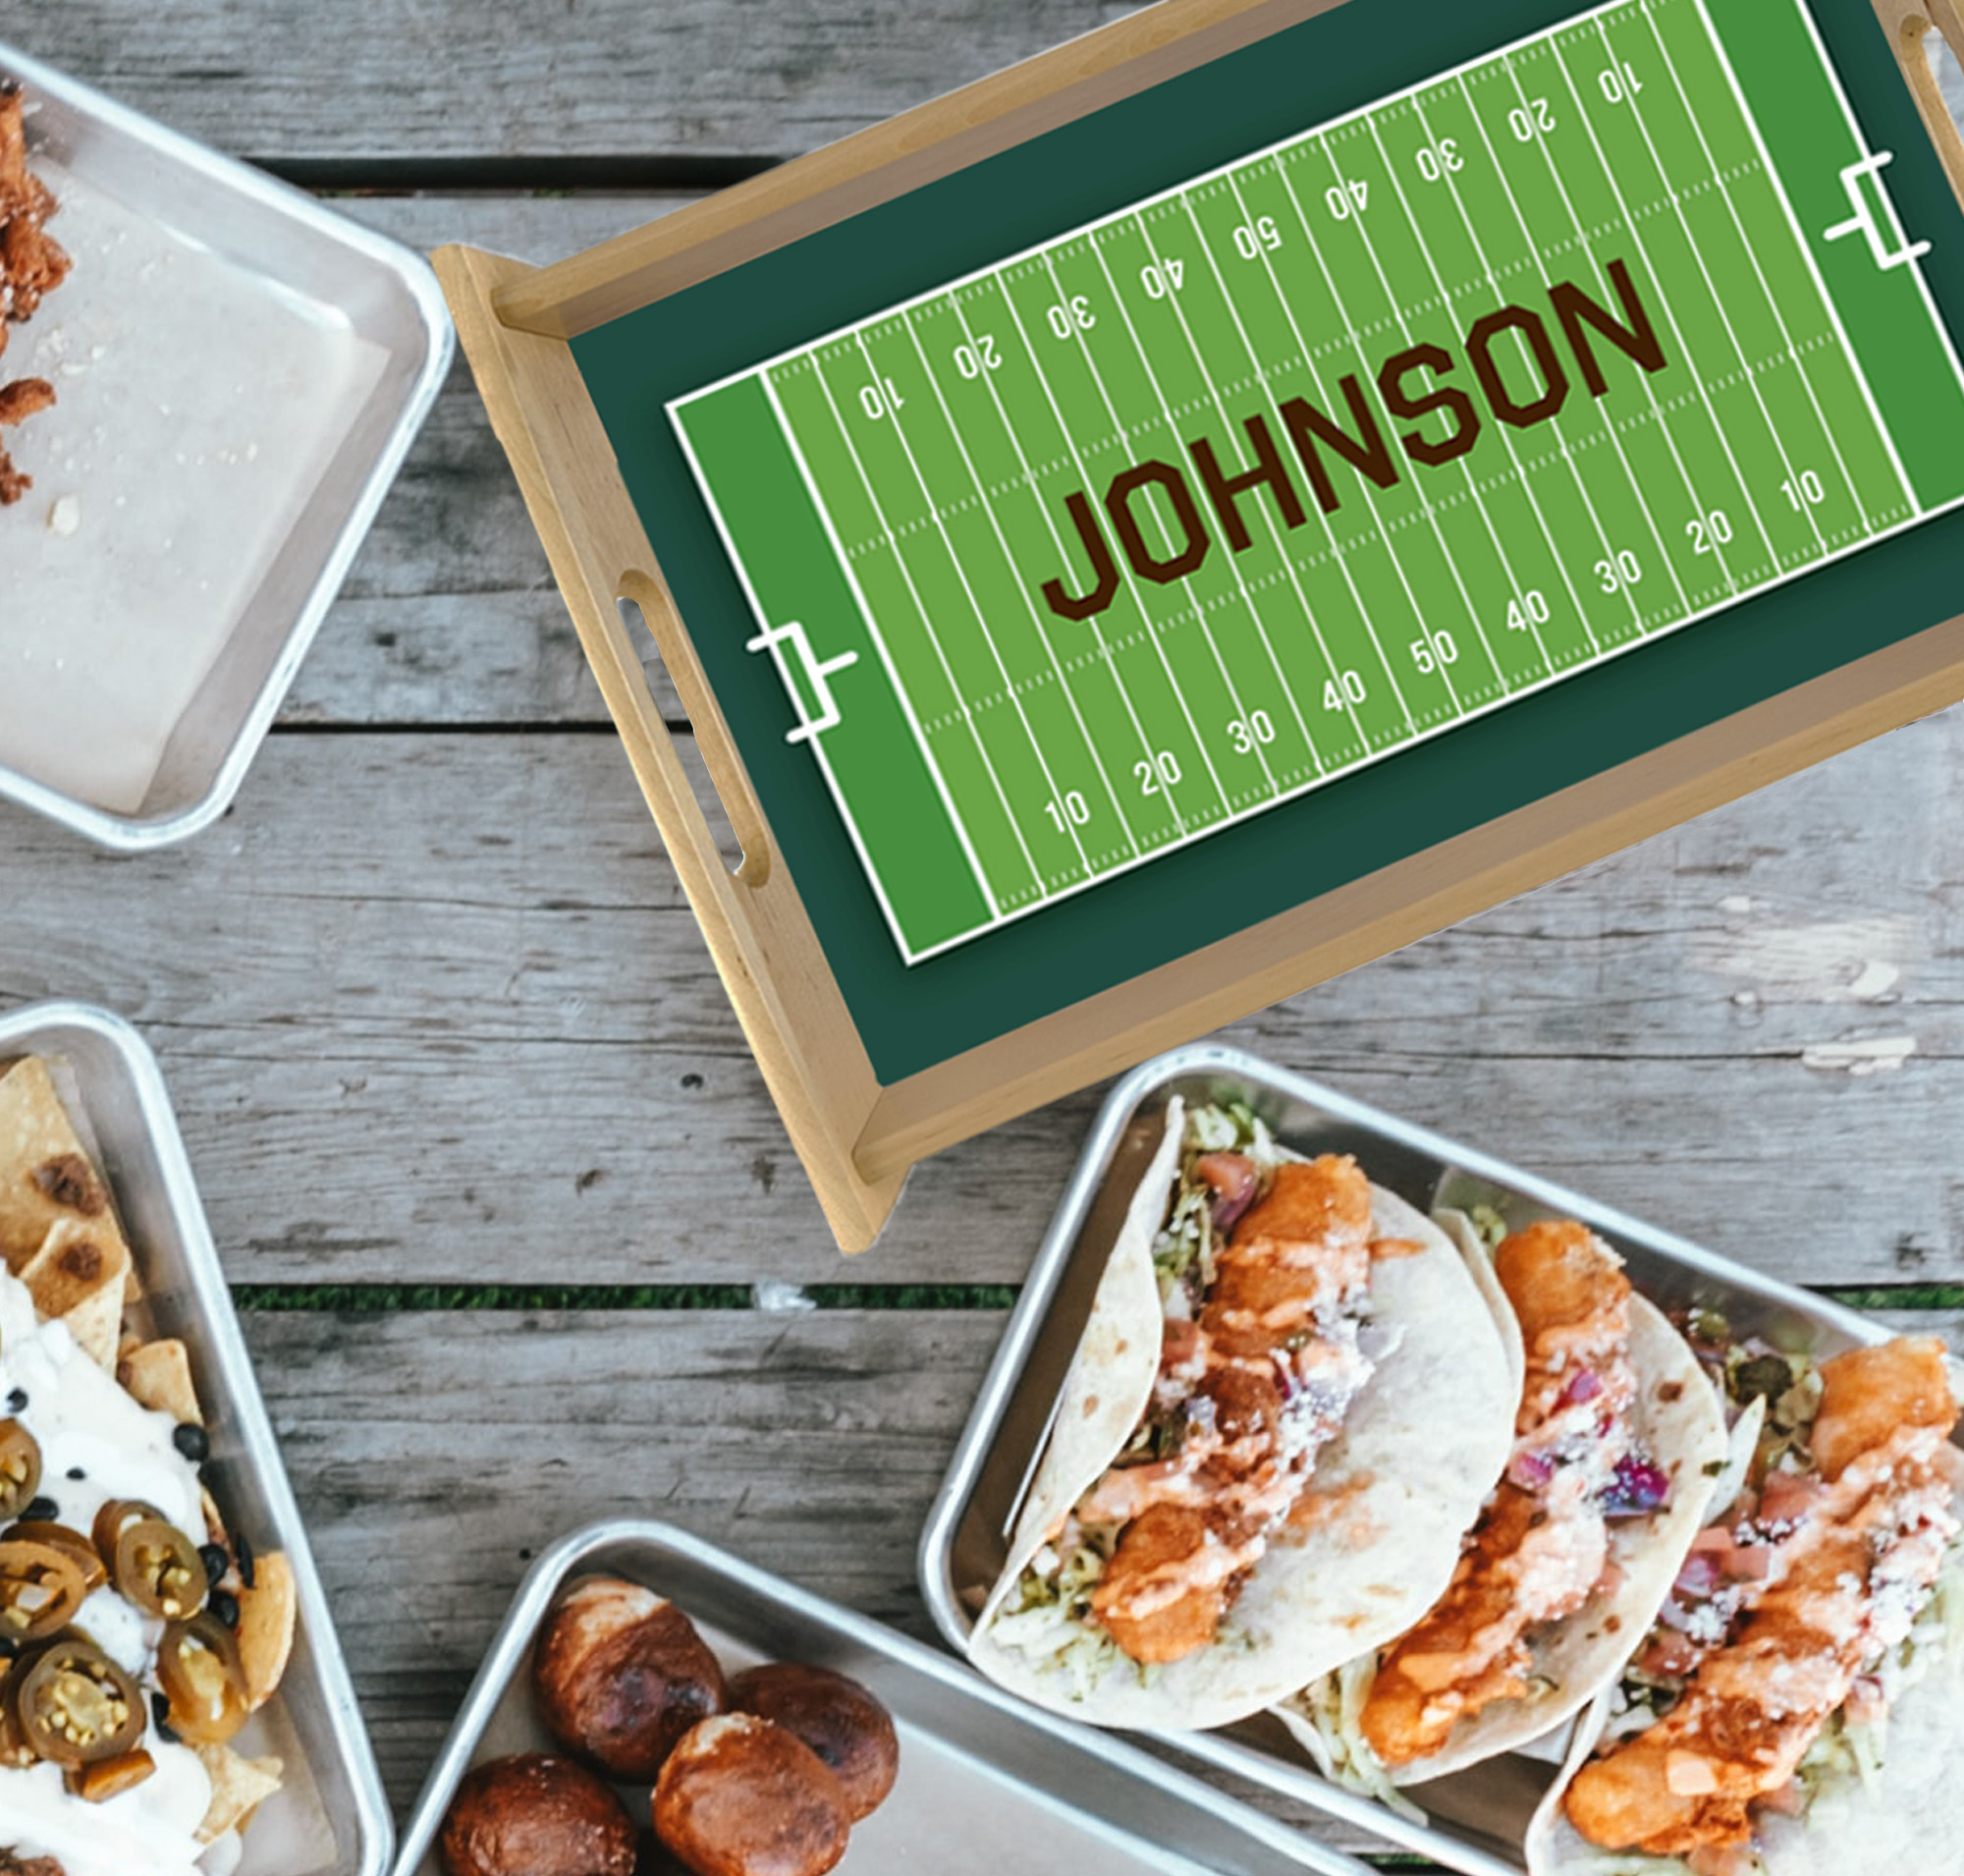 serving tray customized with a name and sports design set on a table near other trays of food